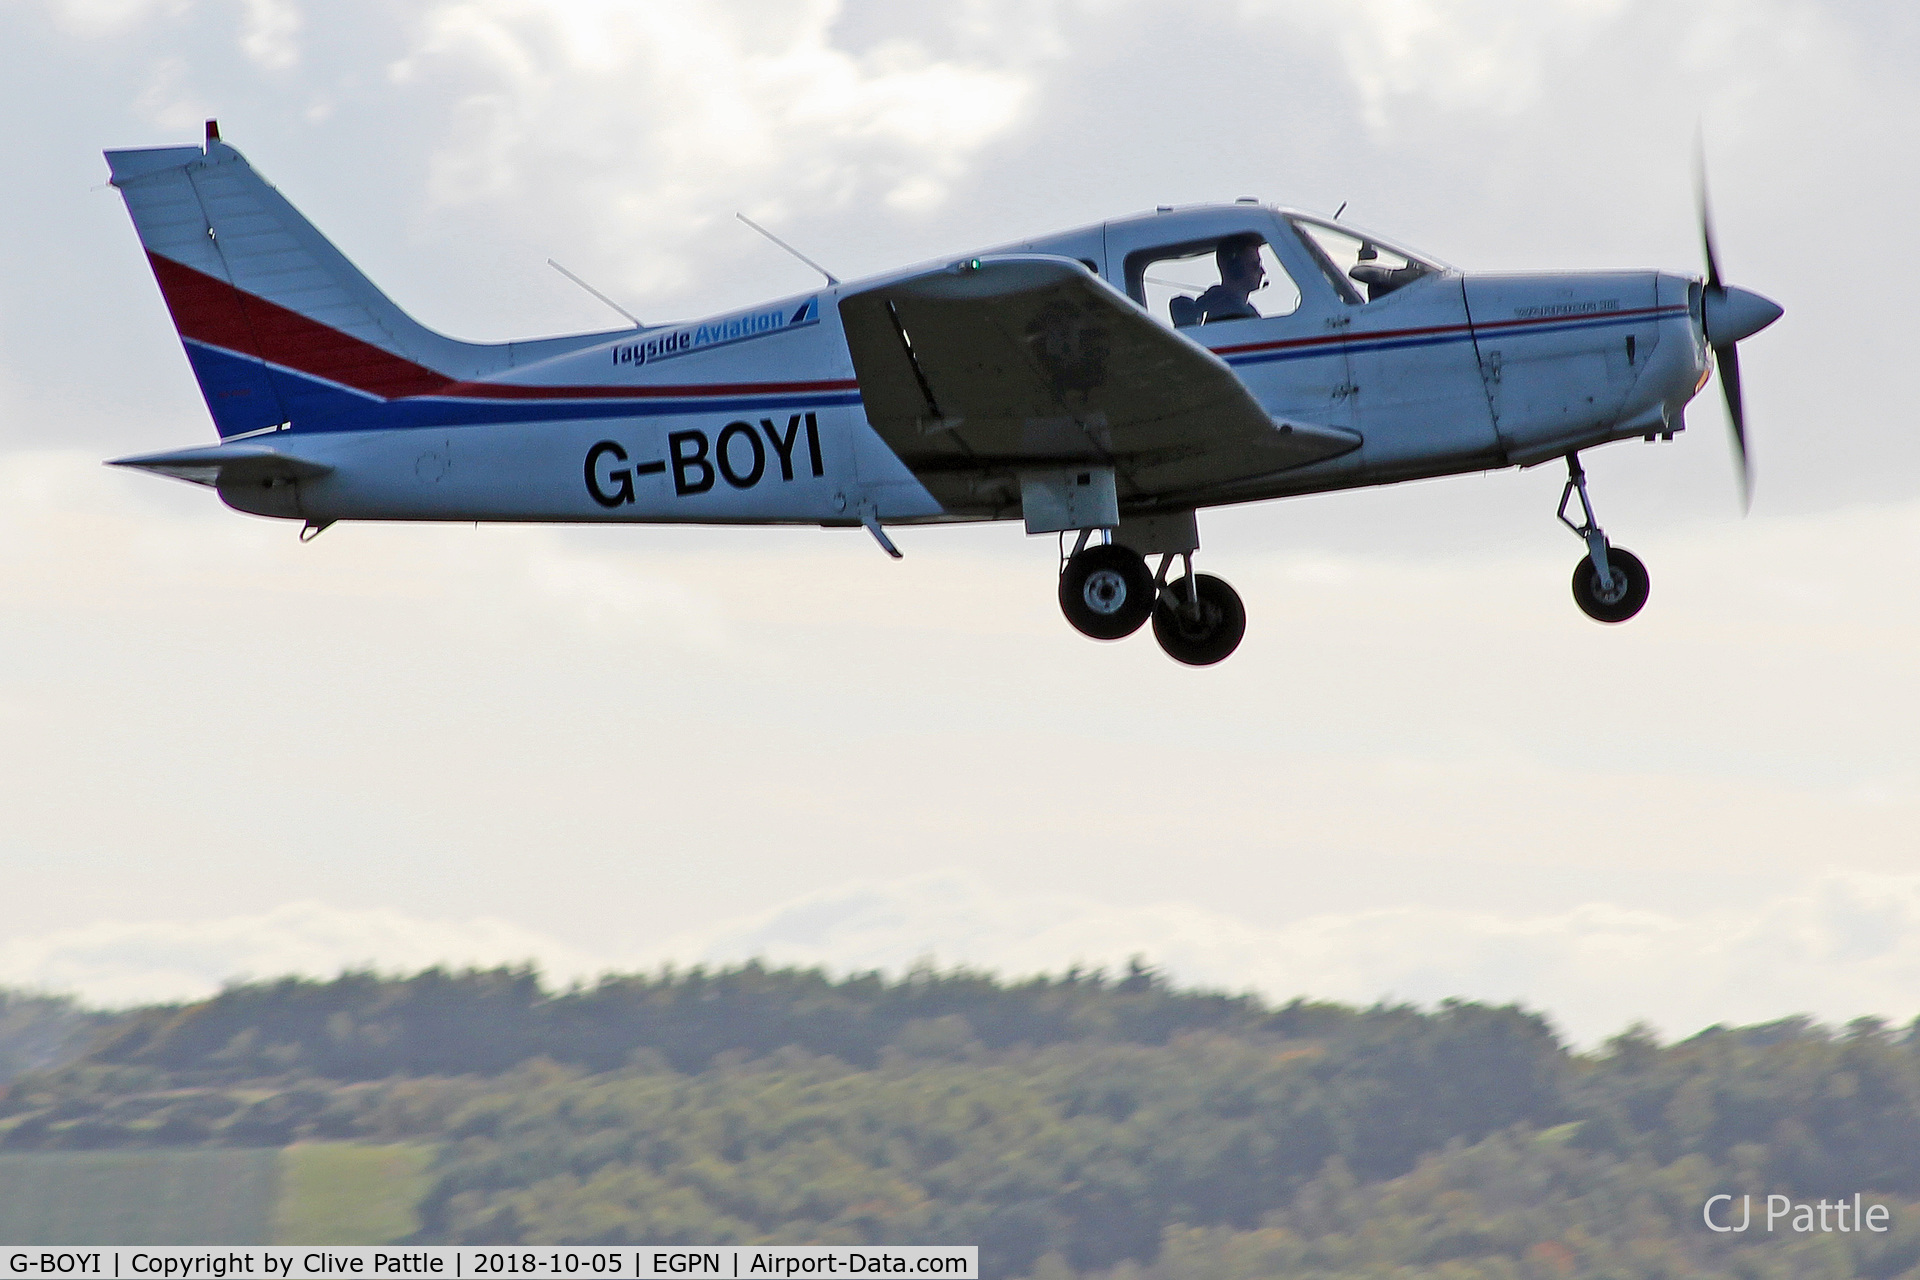 G-BOYI, 1978 Piper PA-28-161 Cherokee Warrior II C/N 28-7816183, Tayside Aviation departure from Dundee